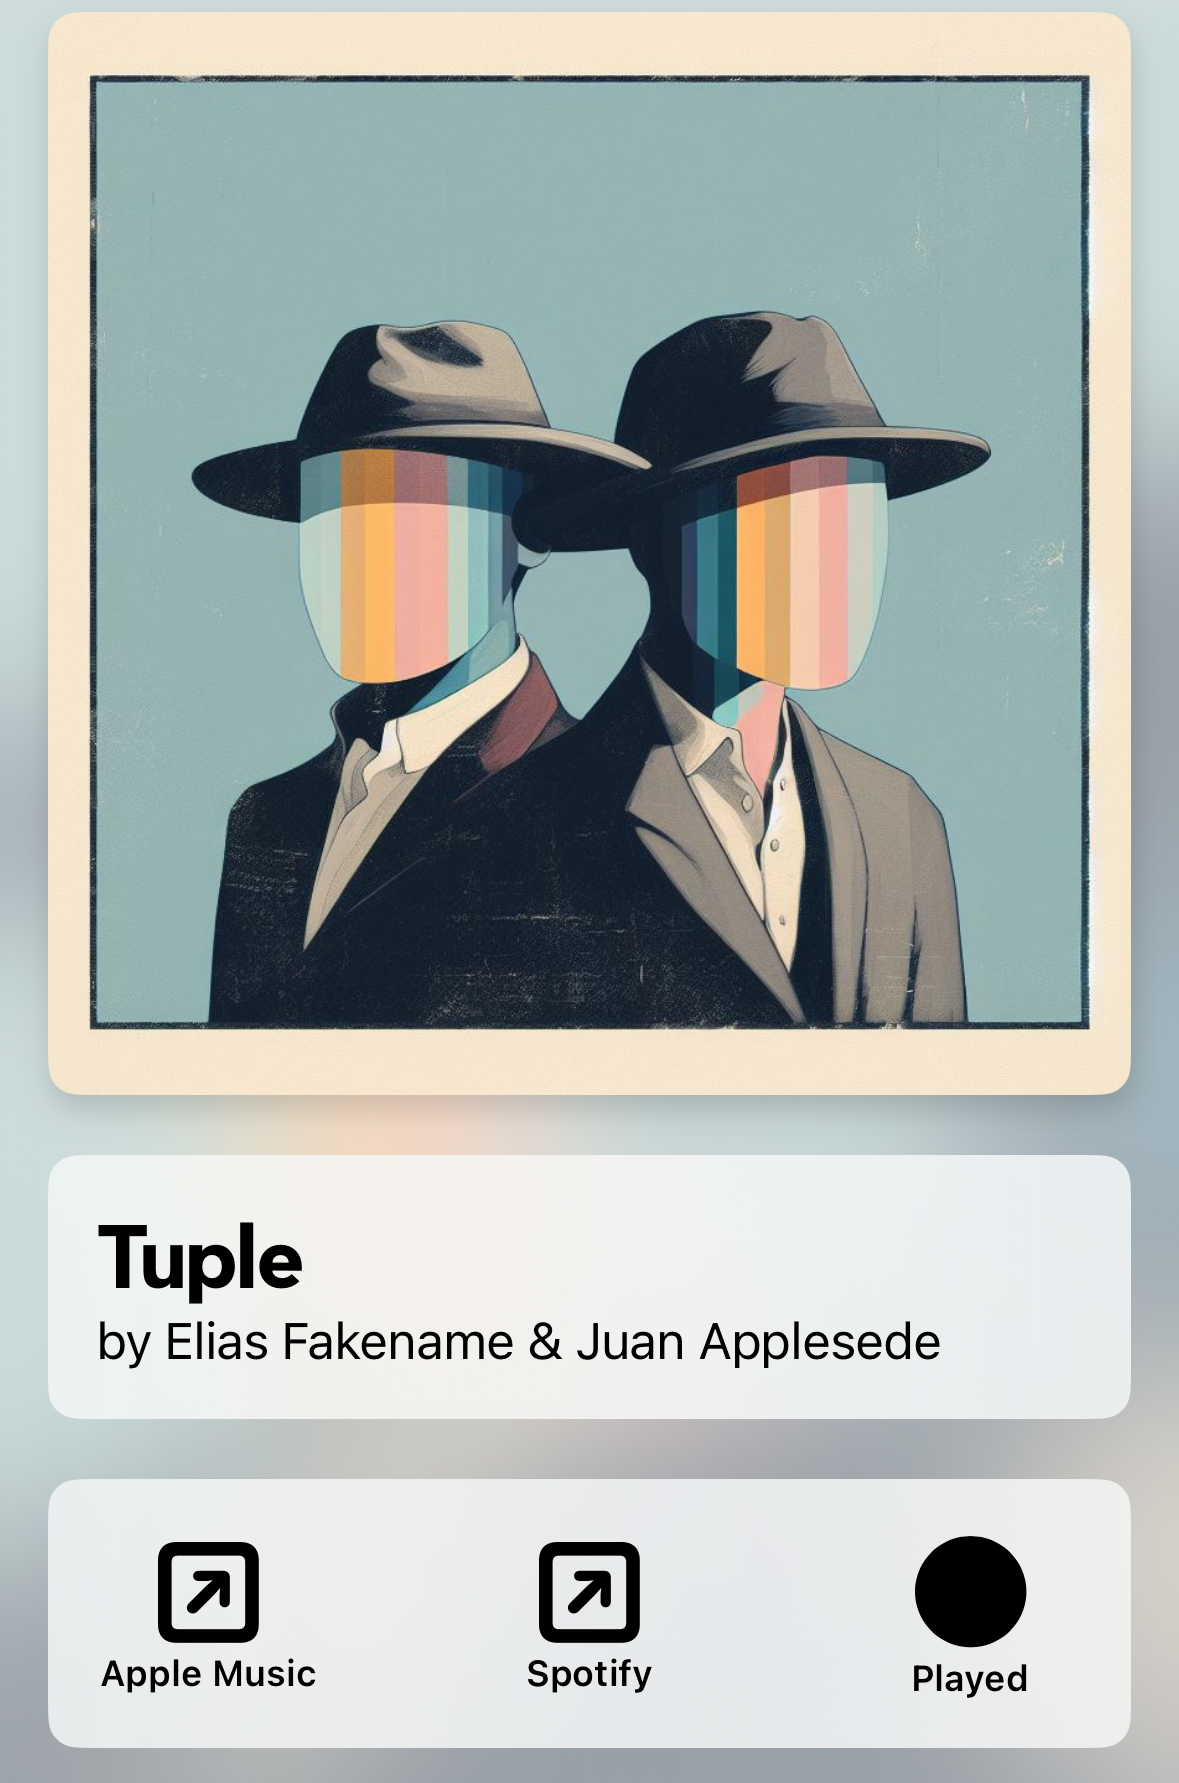 A screenshot of the album detail view featureing an album called Tuple by Elias Fakename and Juan Applesede